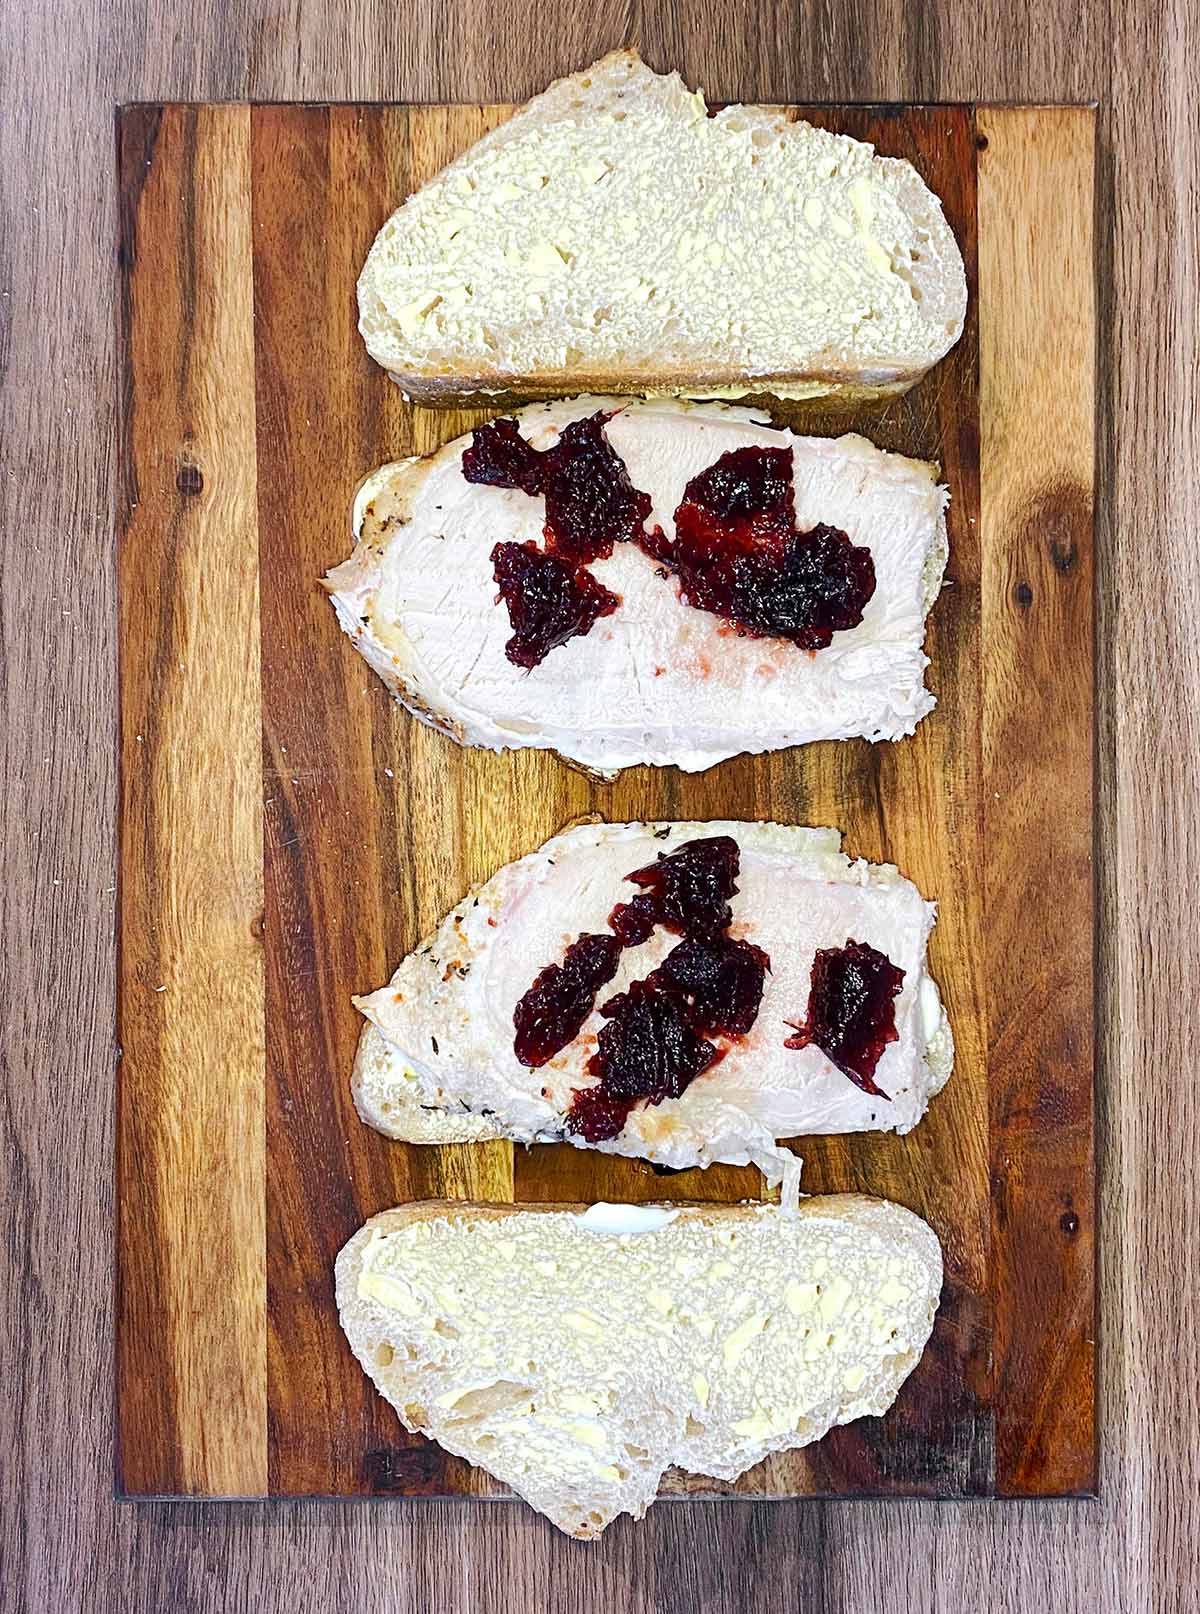 Slices of bread with turkey and cranberry sauce on it.